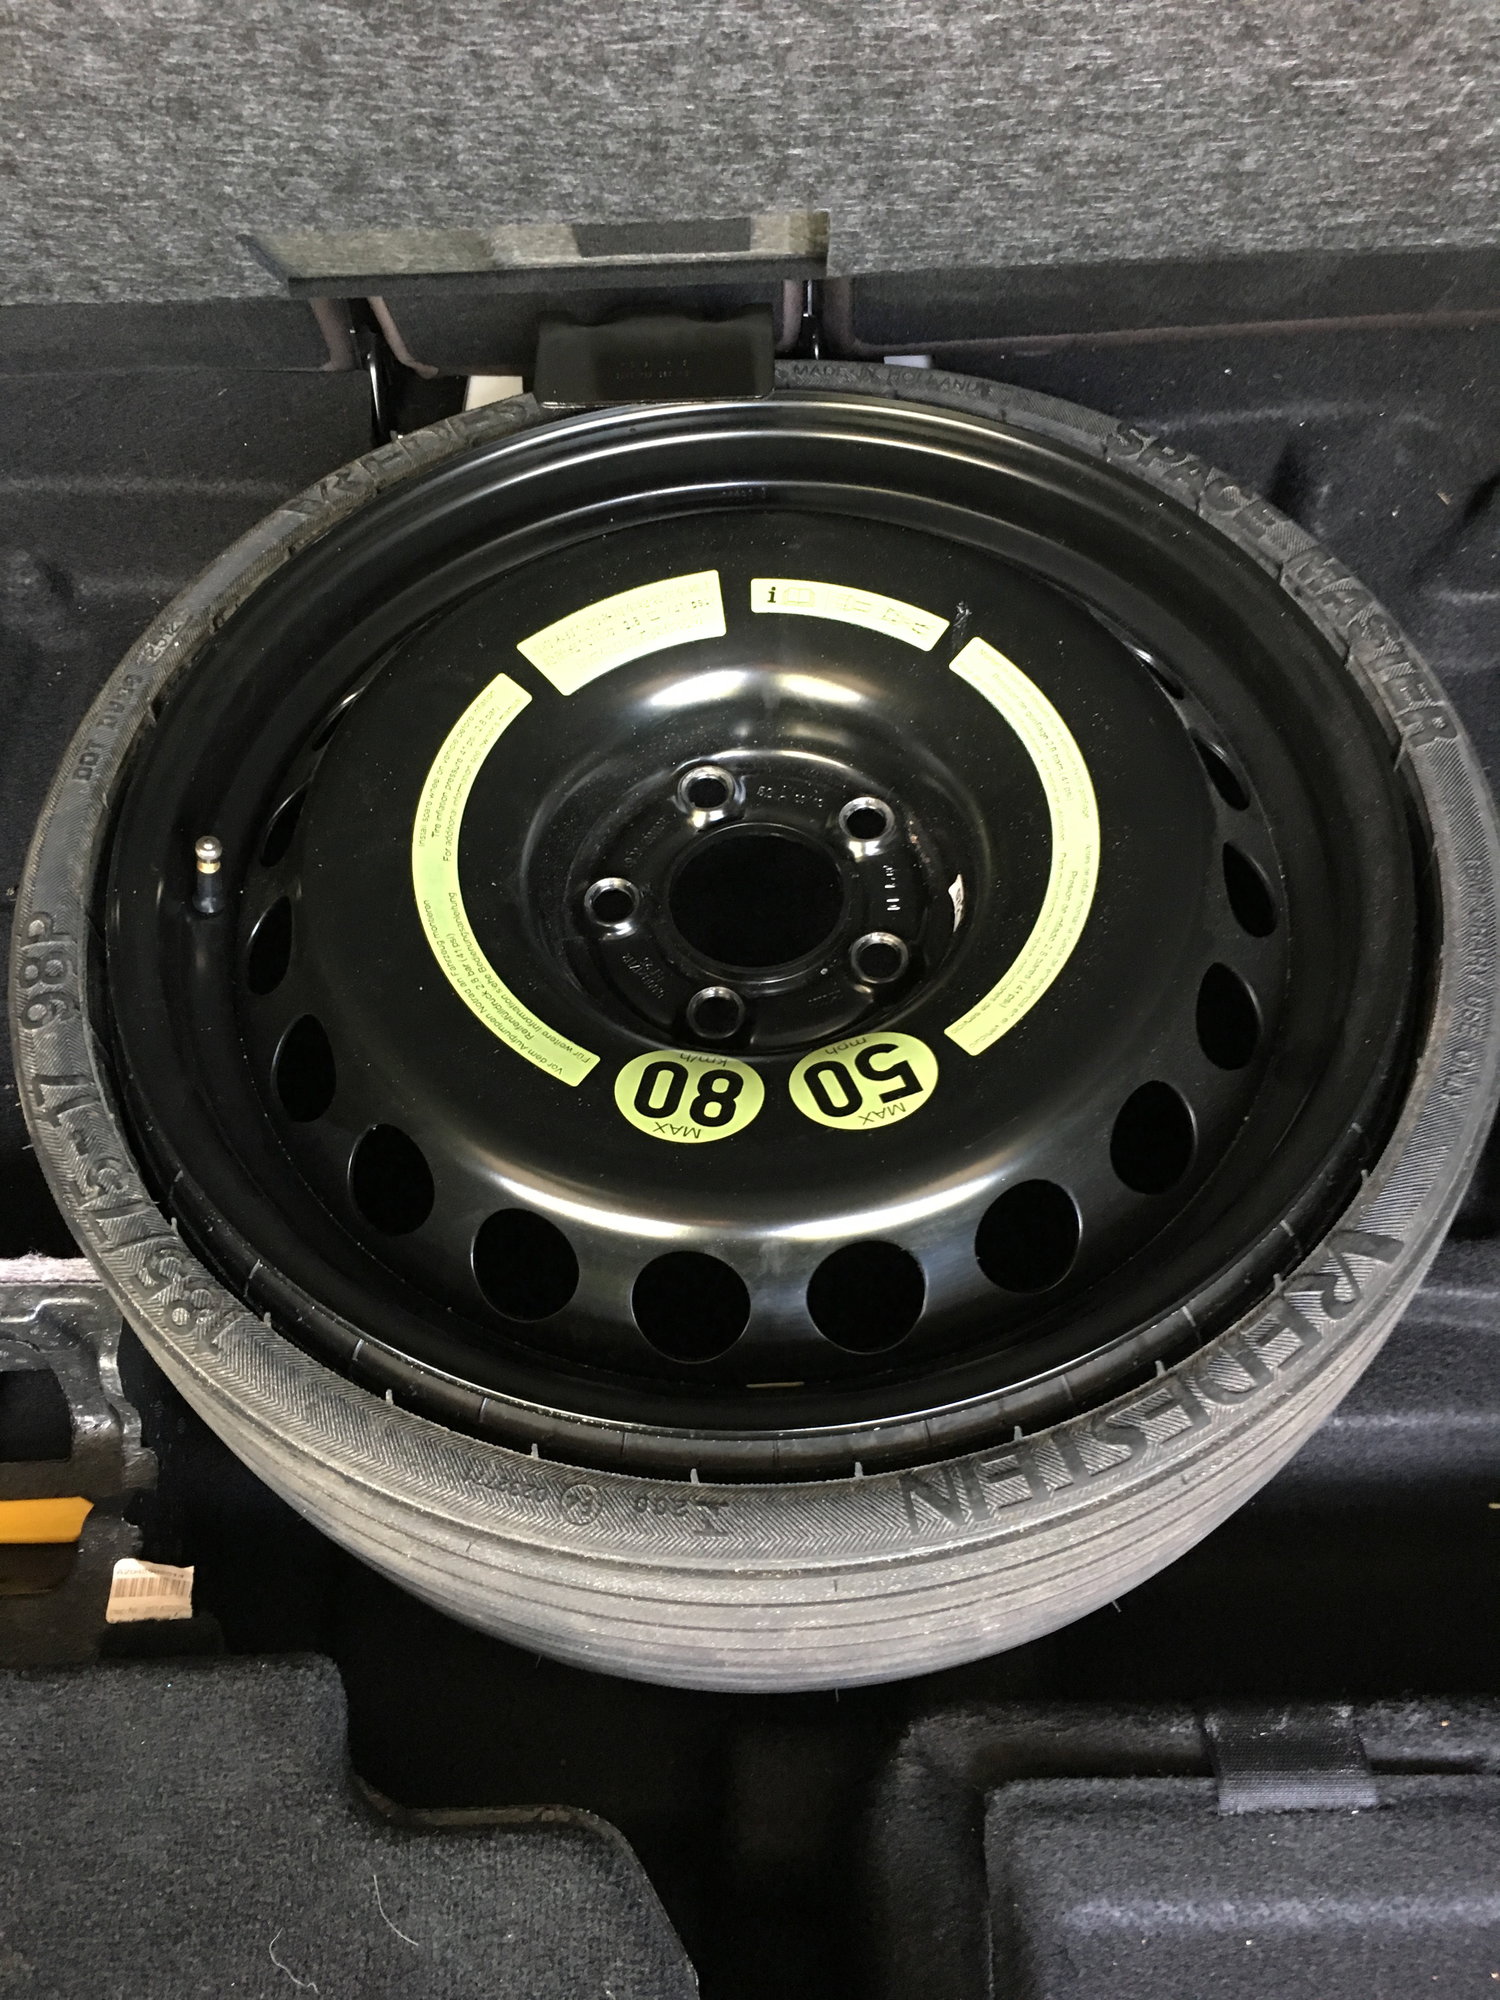 GLC300 Spare Tire Options - MBWorld.org Forums 2019 Mercedes Benz Glc 300 Spare Tire Kit